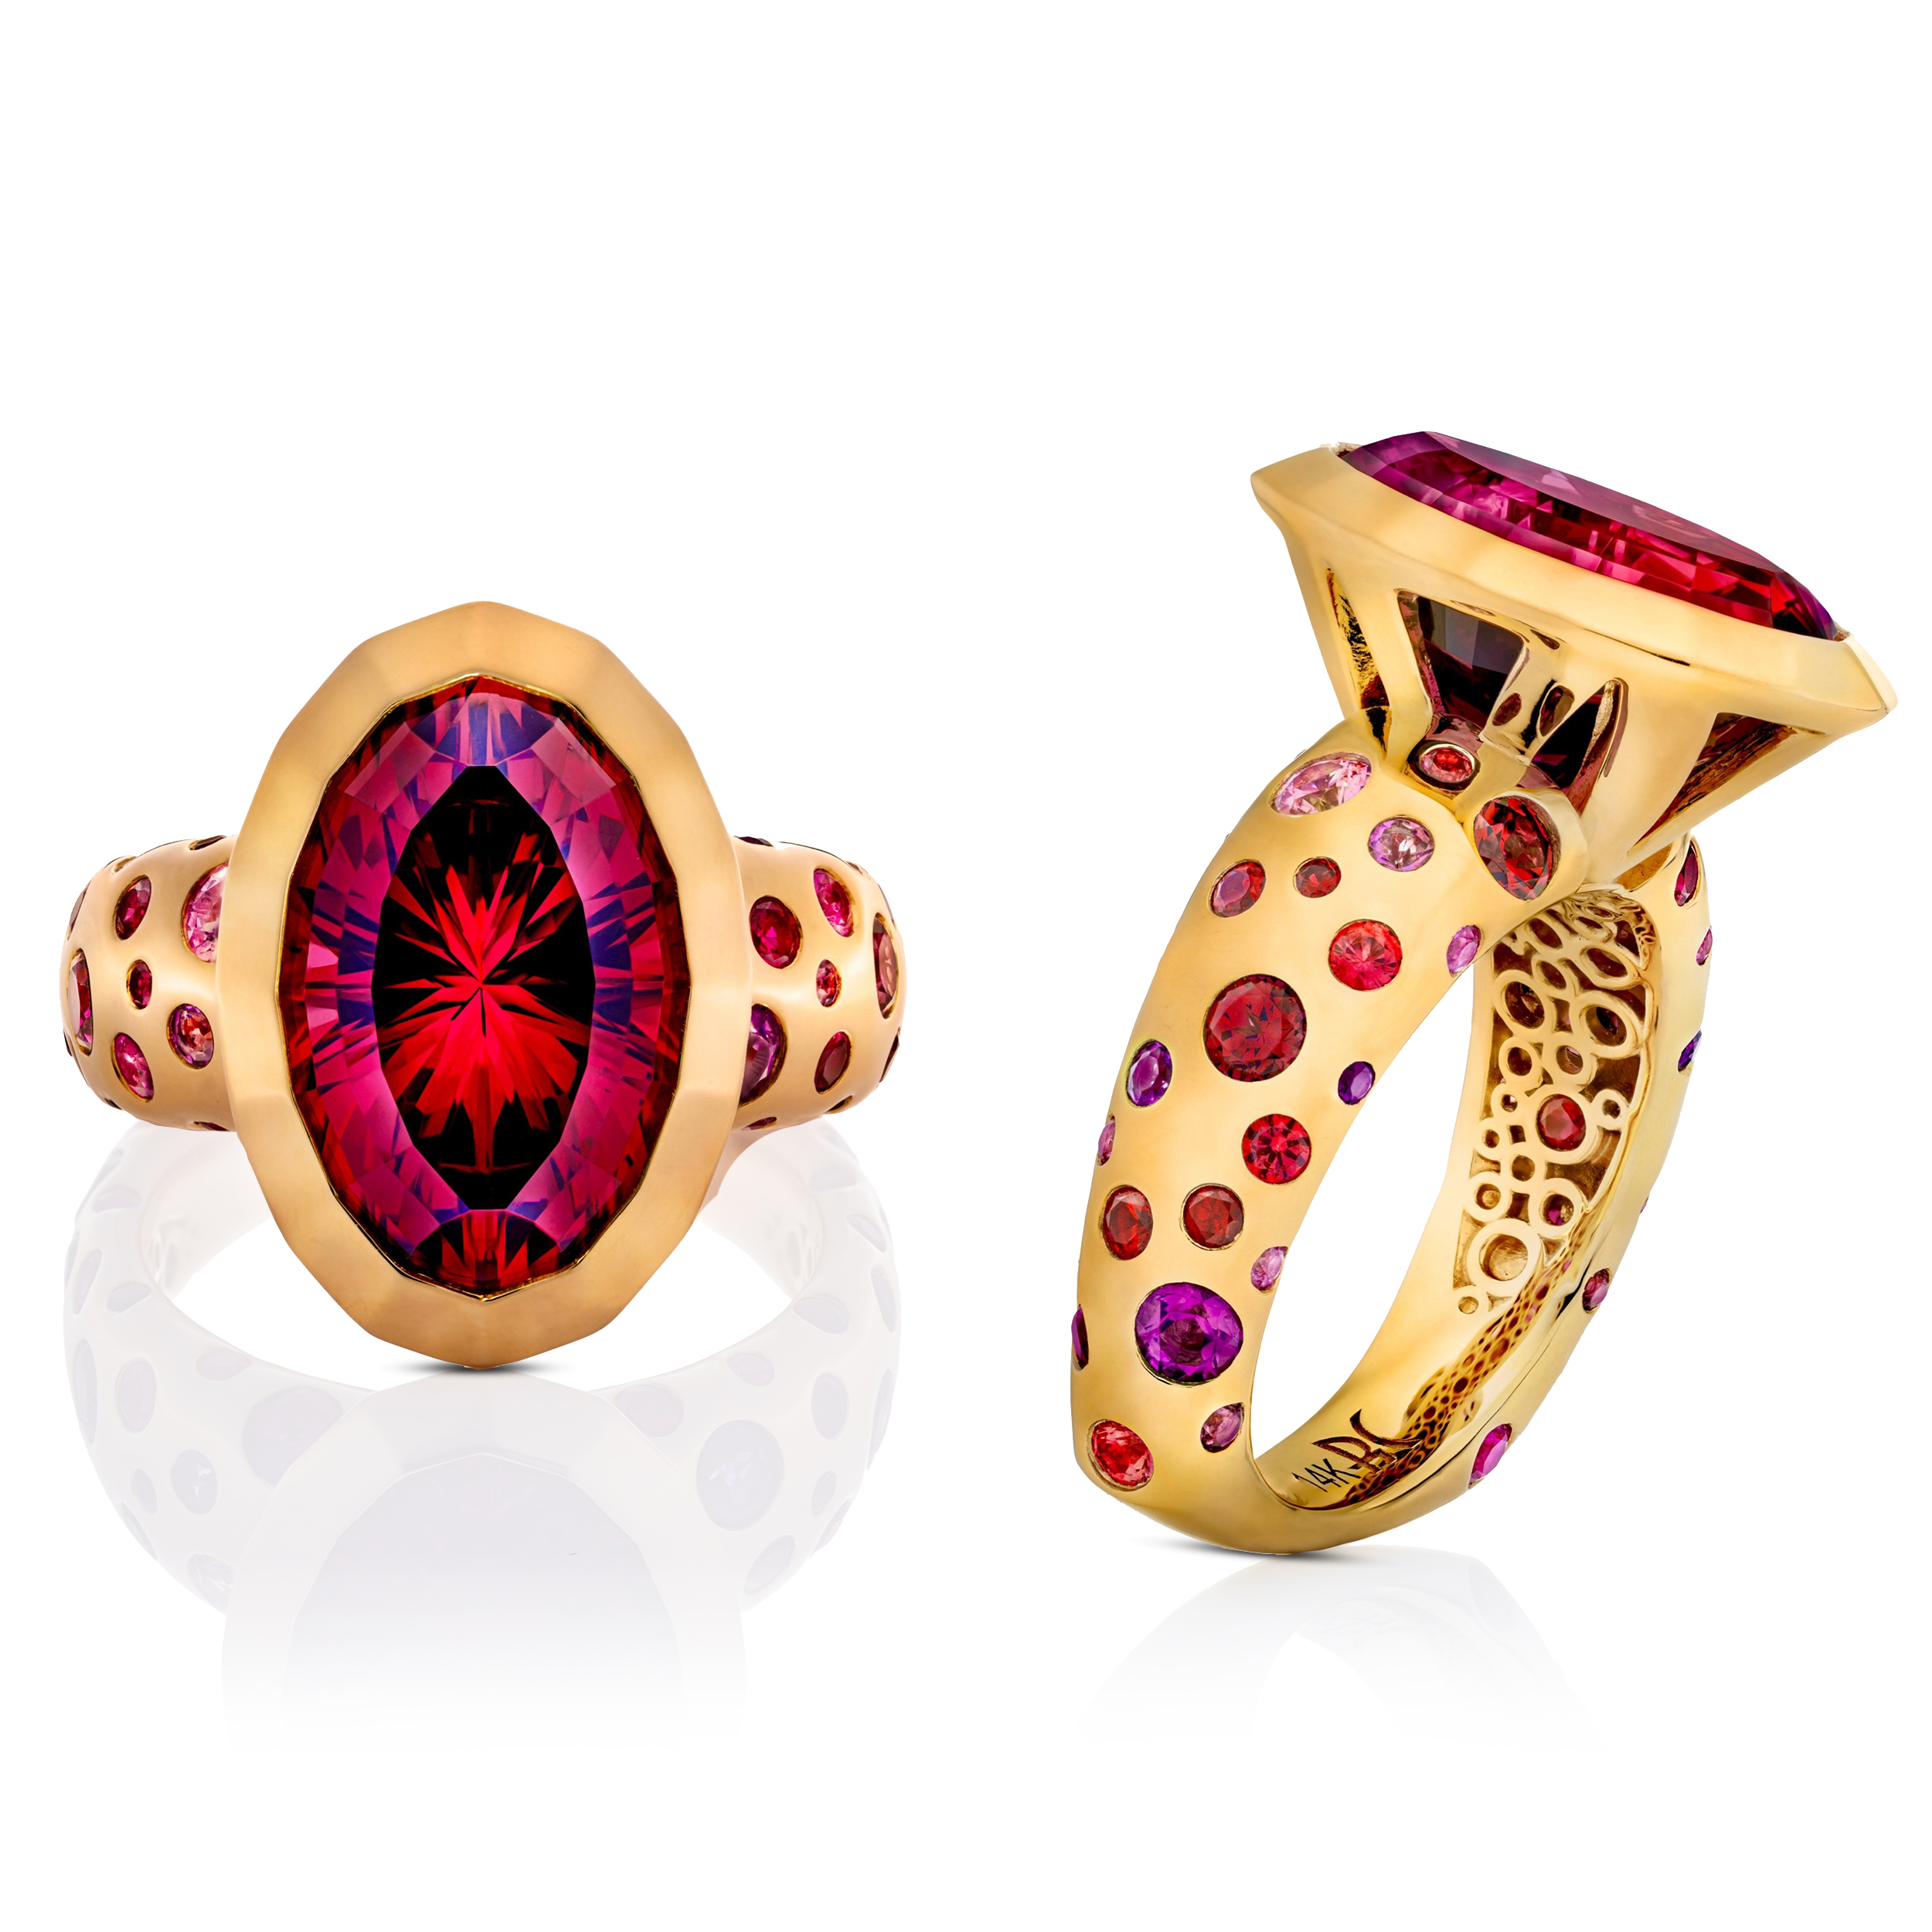 INSTORE Design Awards 2024 – Colored Stone Jewelry Over $5,000